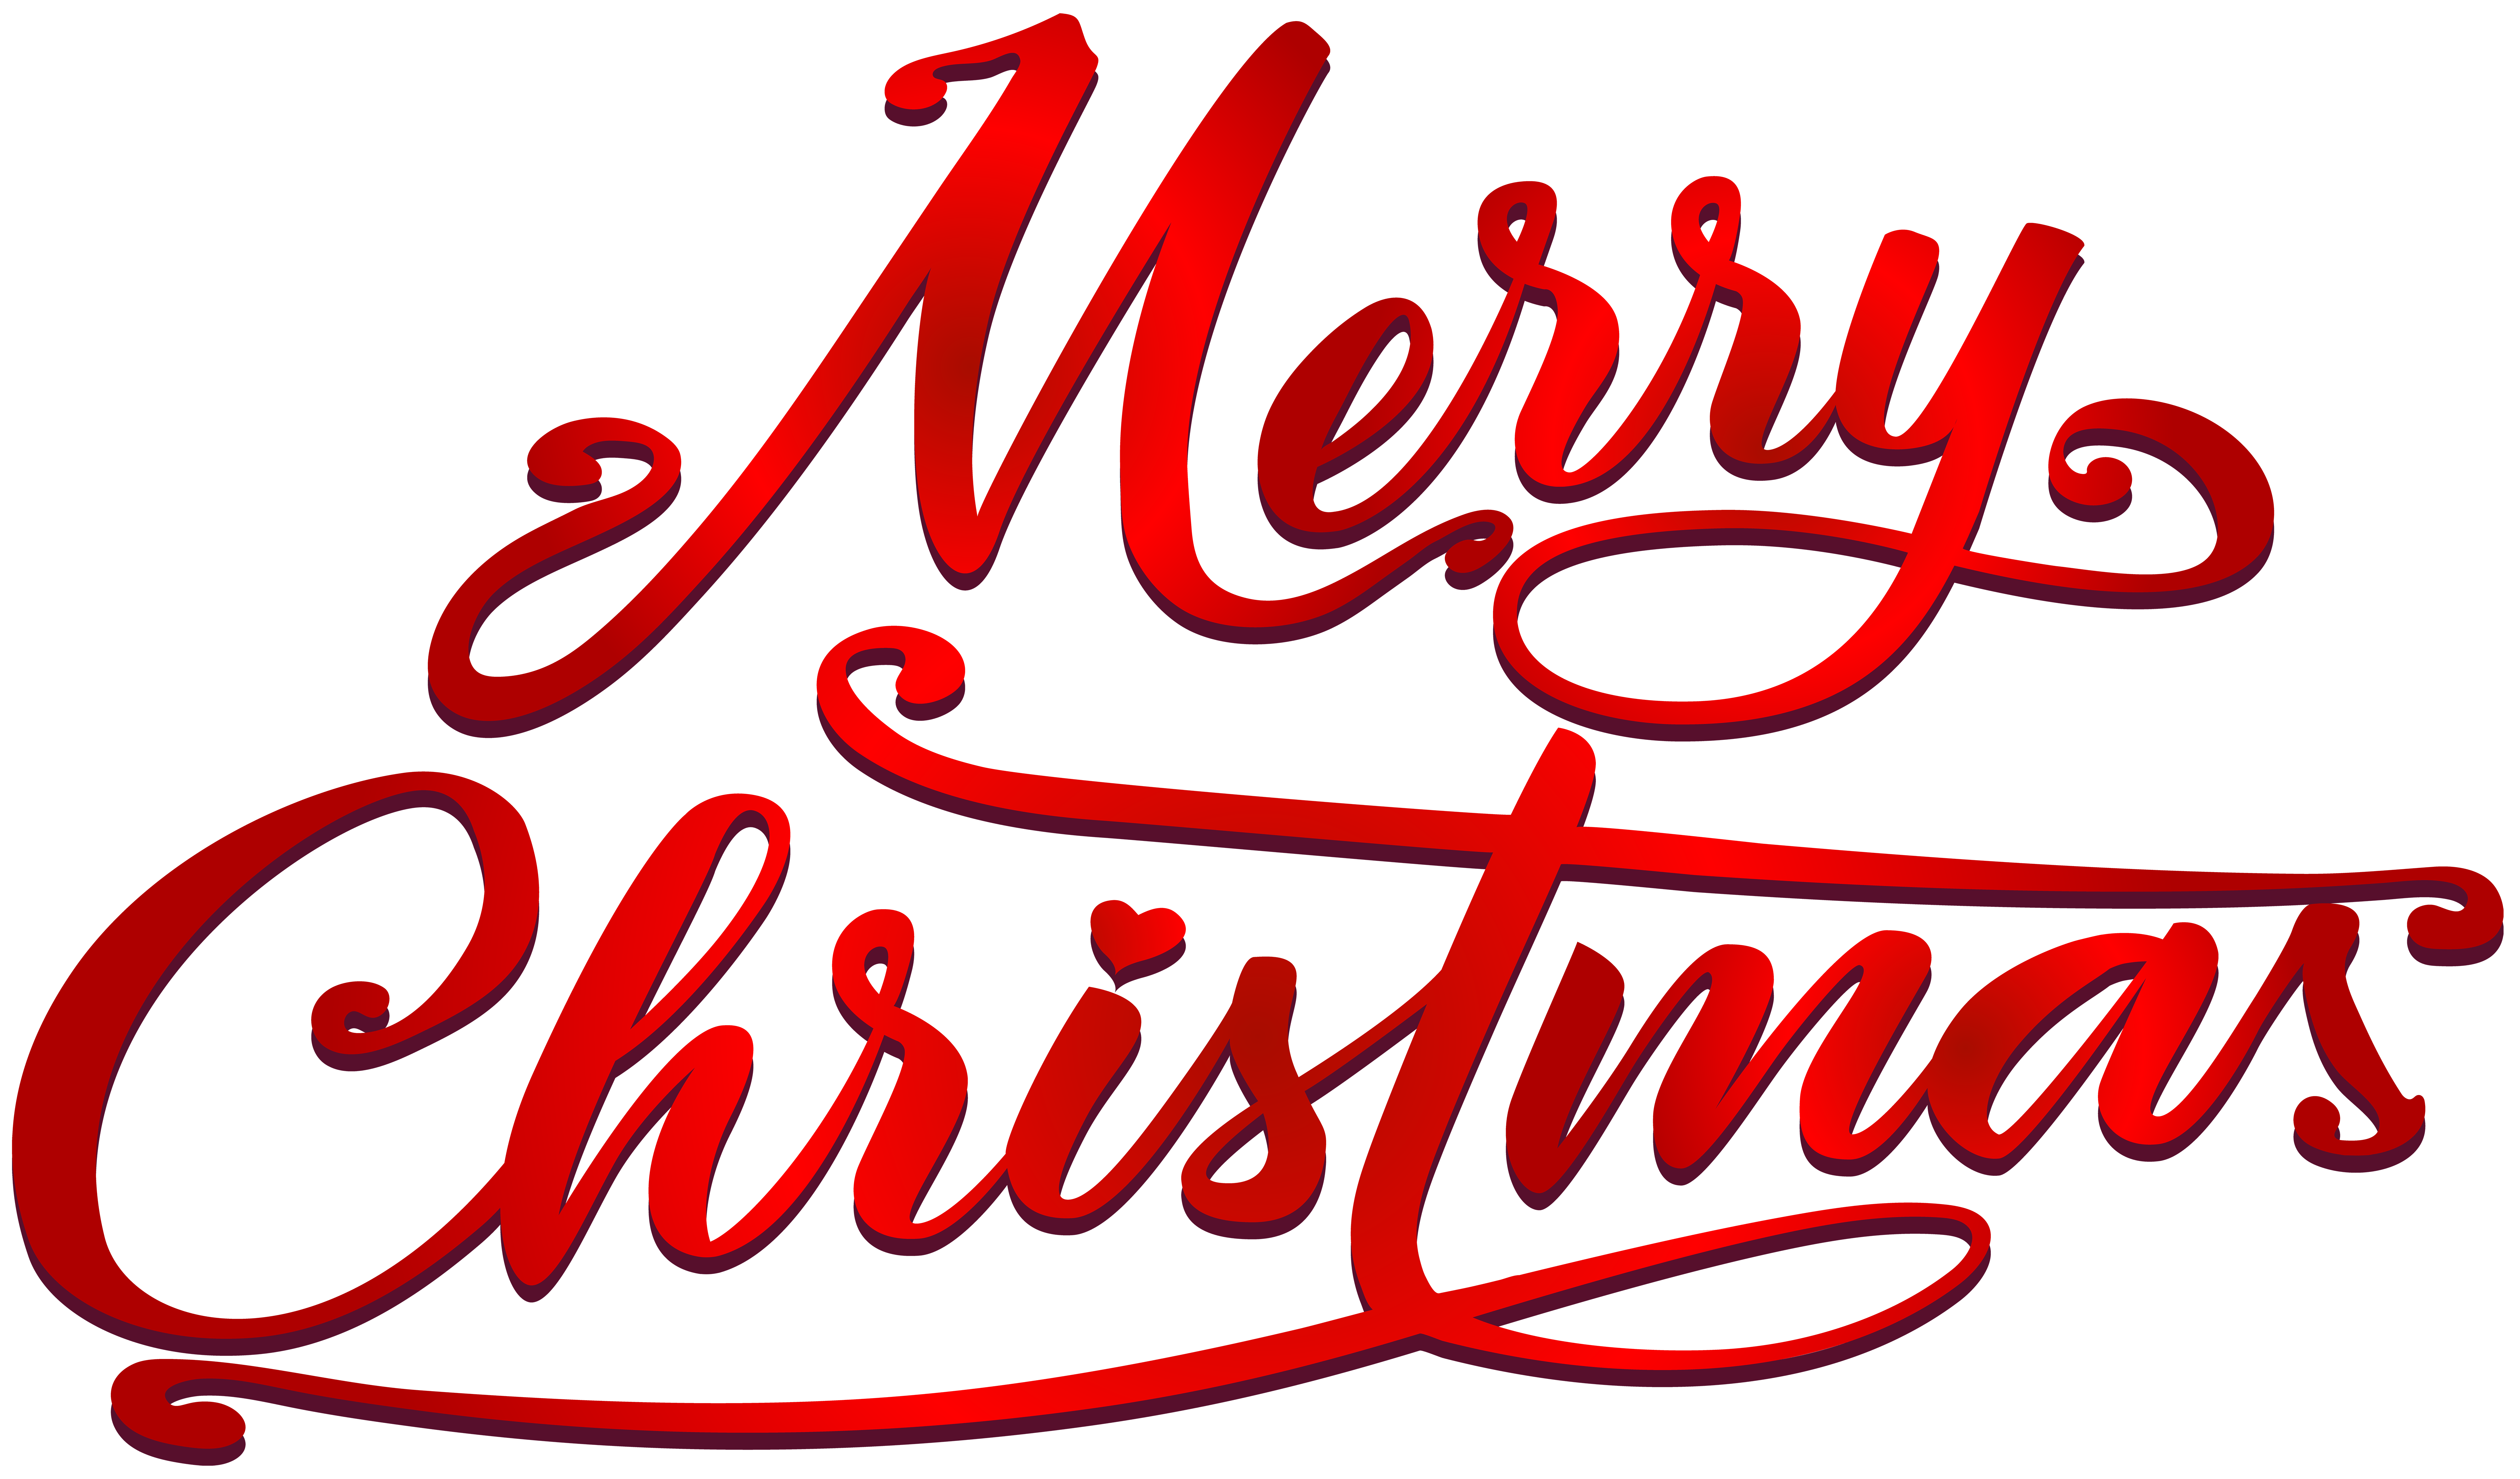 Merry Christmas Text PNG Clip Art Image | Gallery Yopriceville - High